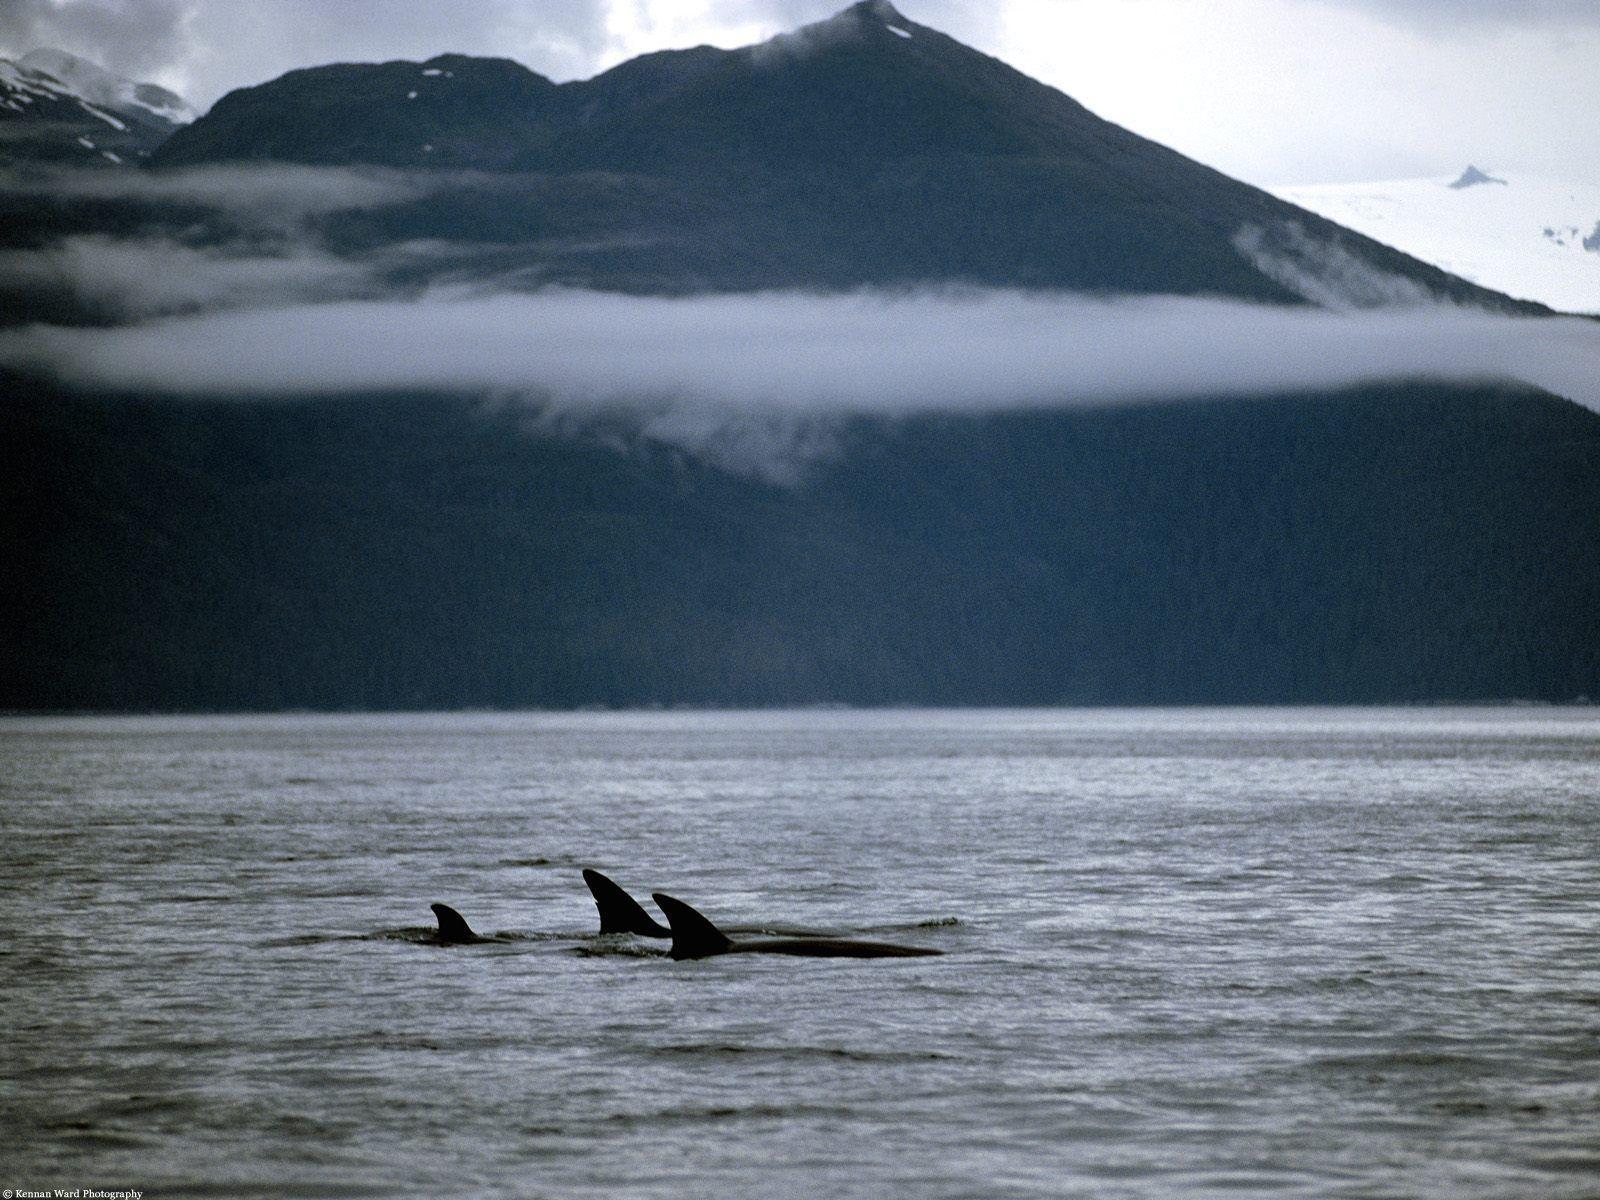 A Family of Orca Whales